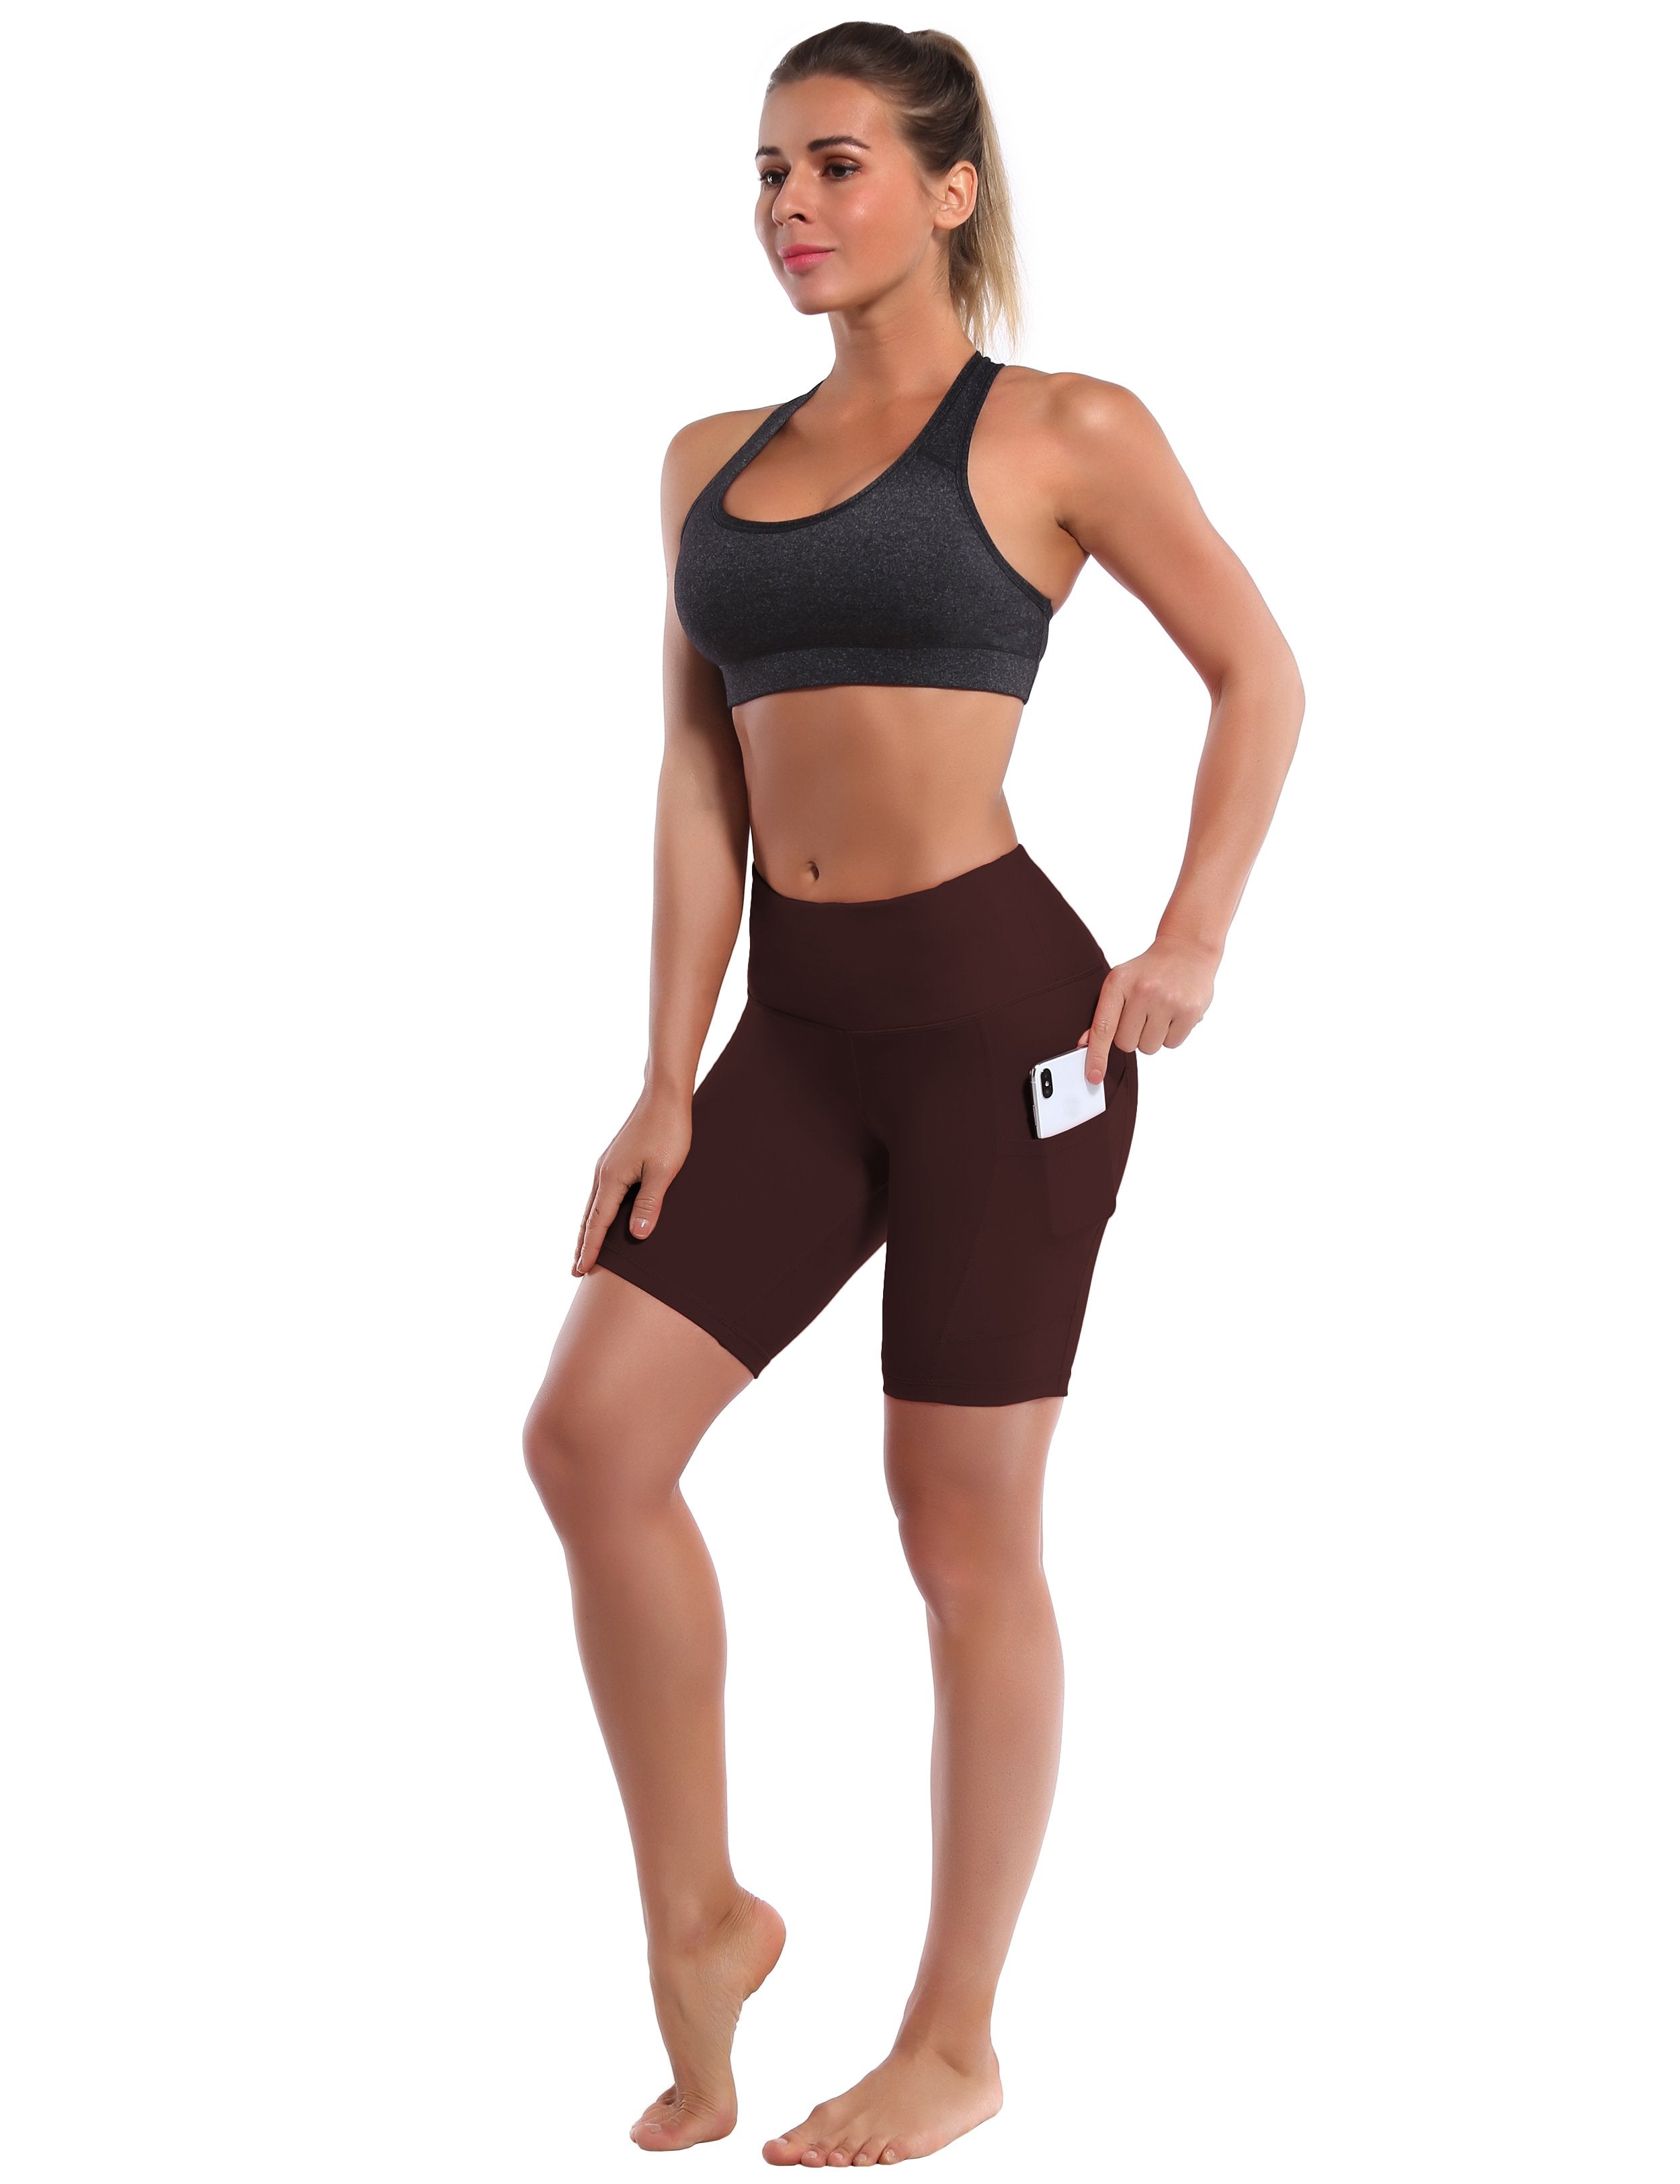 8" Side Pockets Running Shorts mahoganymaroon Sleek, soft, smooth and totally comfortable: our newest style is here. Softest-ever fabric High elasticity High density 4-way stretch Fabric doesn't attract lint easily No see-through Moisture-wicking Machine wash 75% Nylon, 25% Spandex